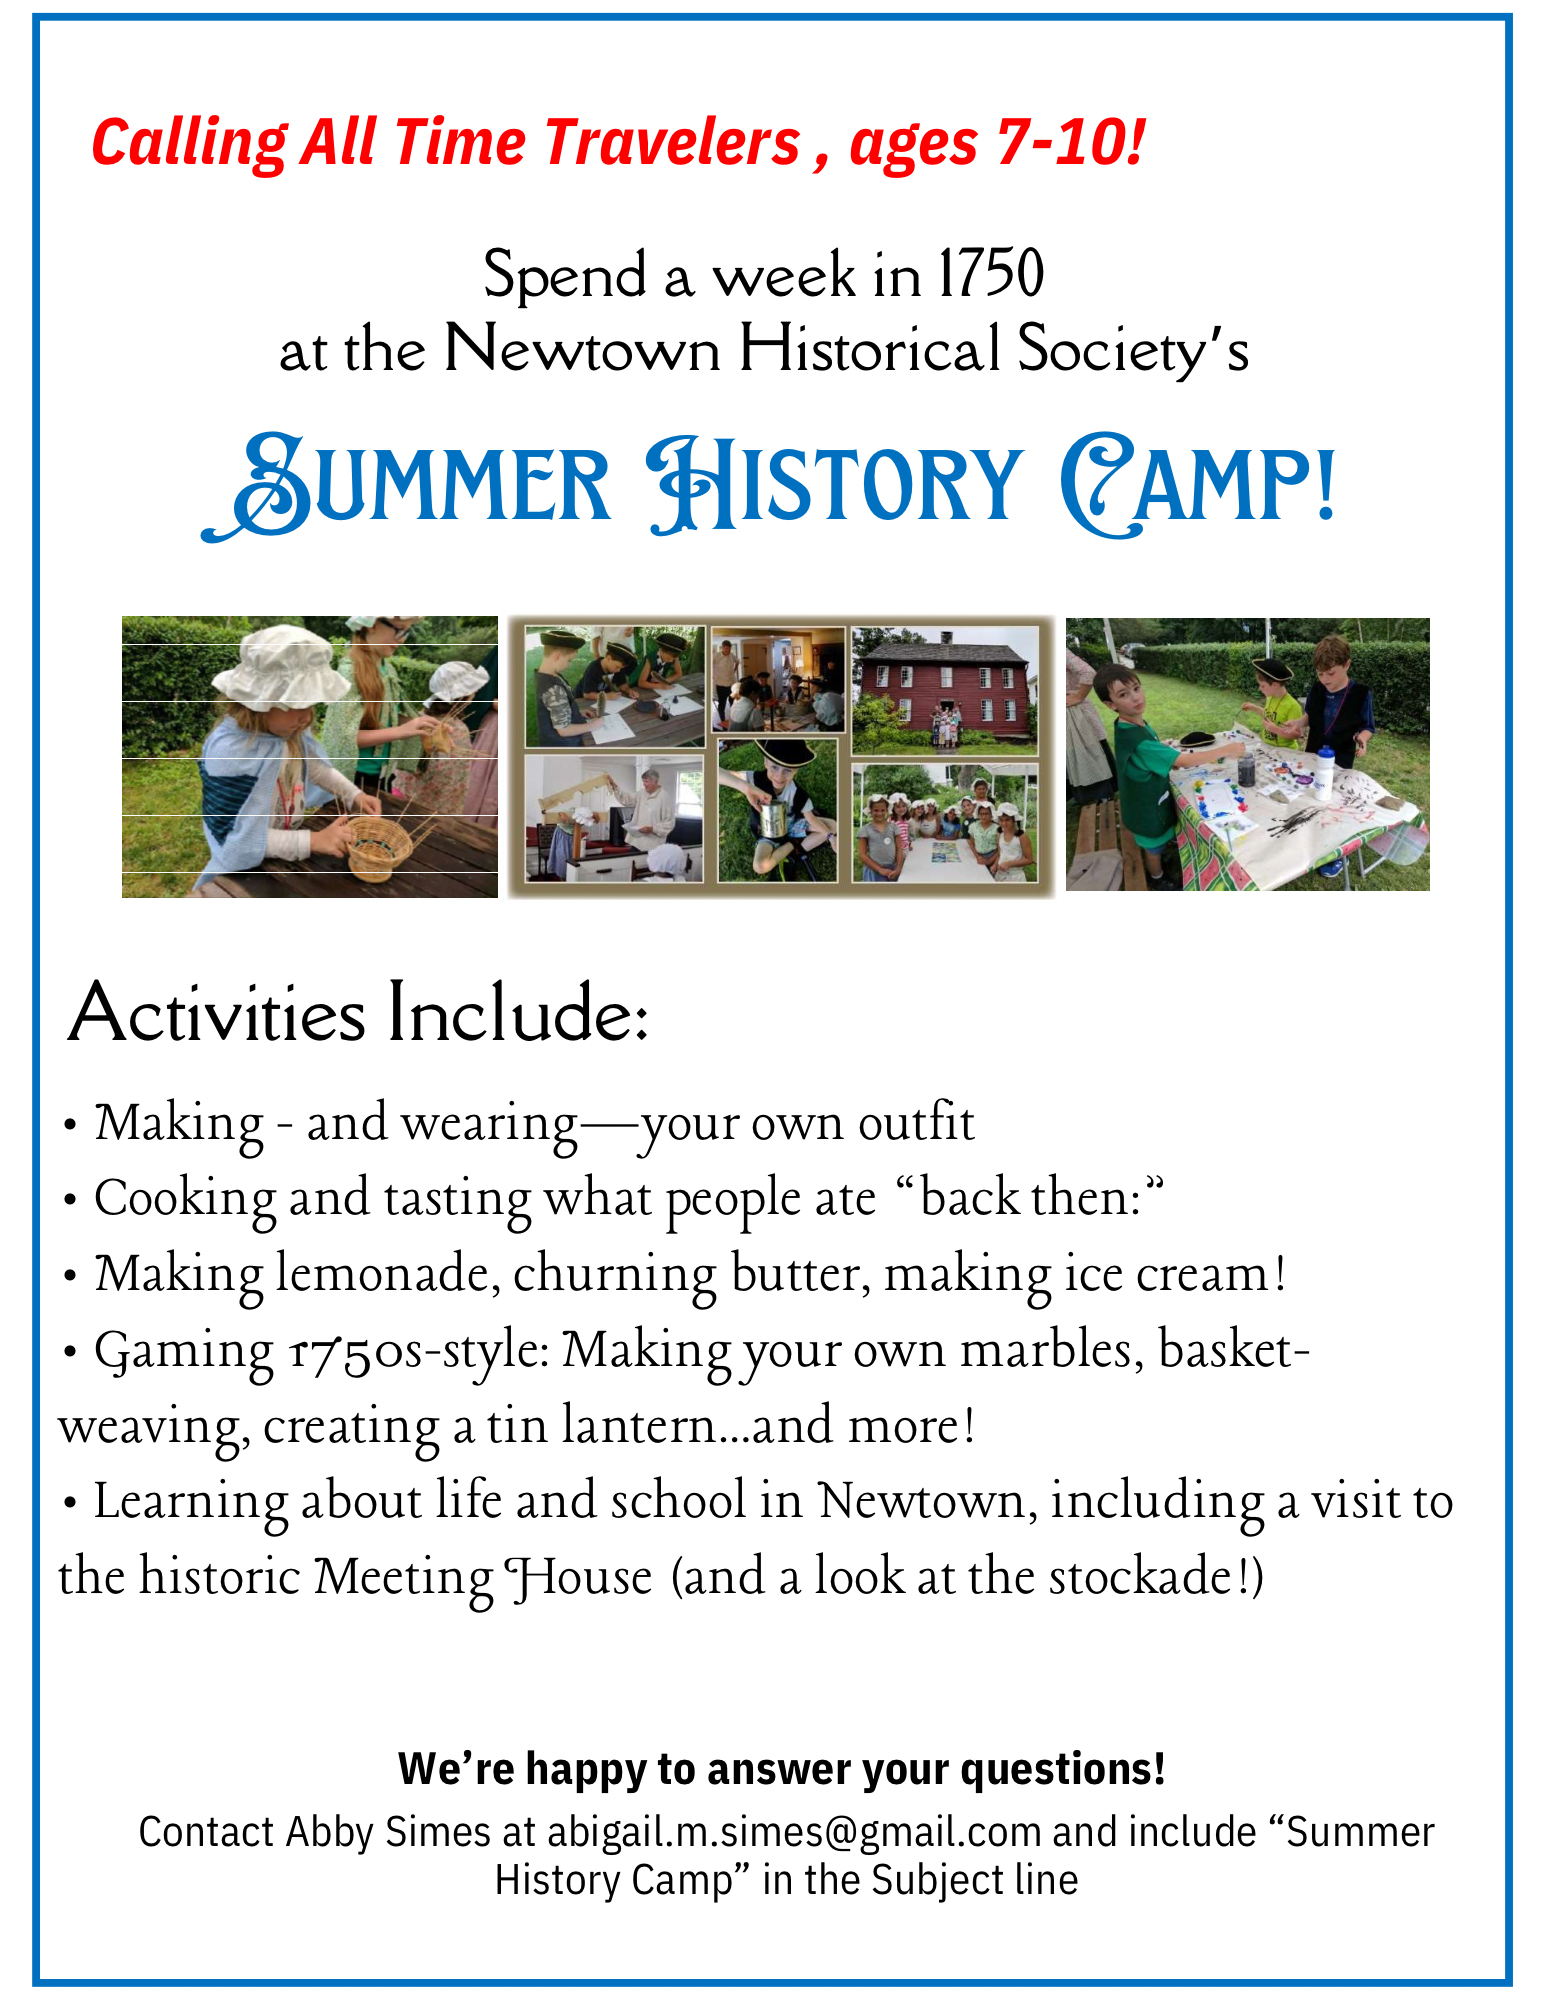 Summer History Camp Poster